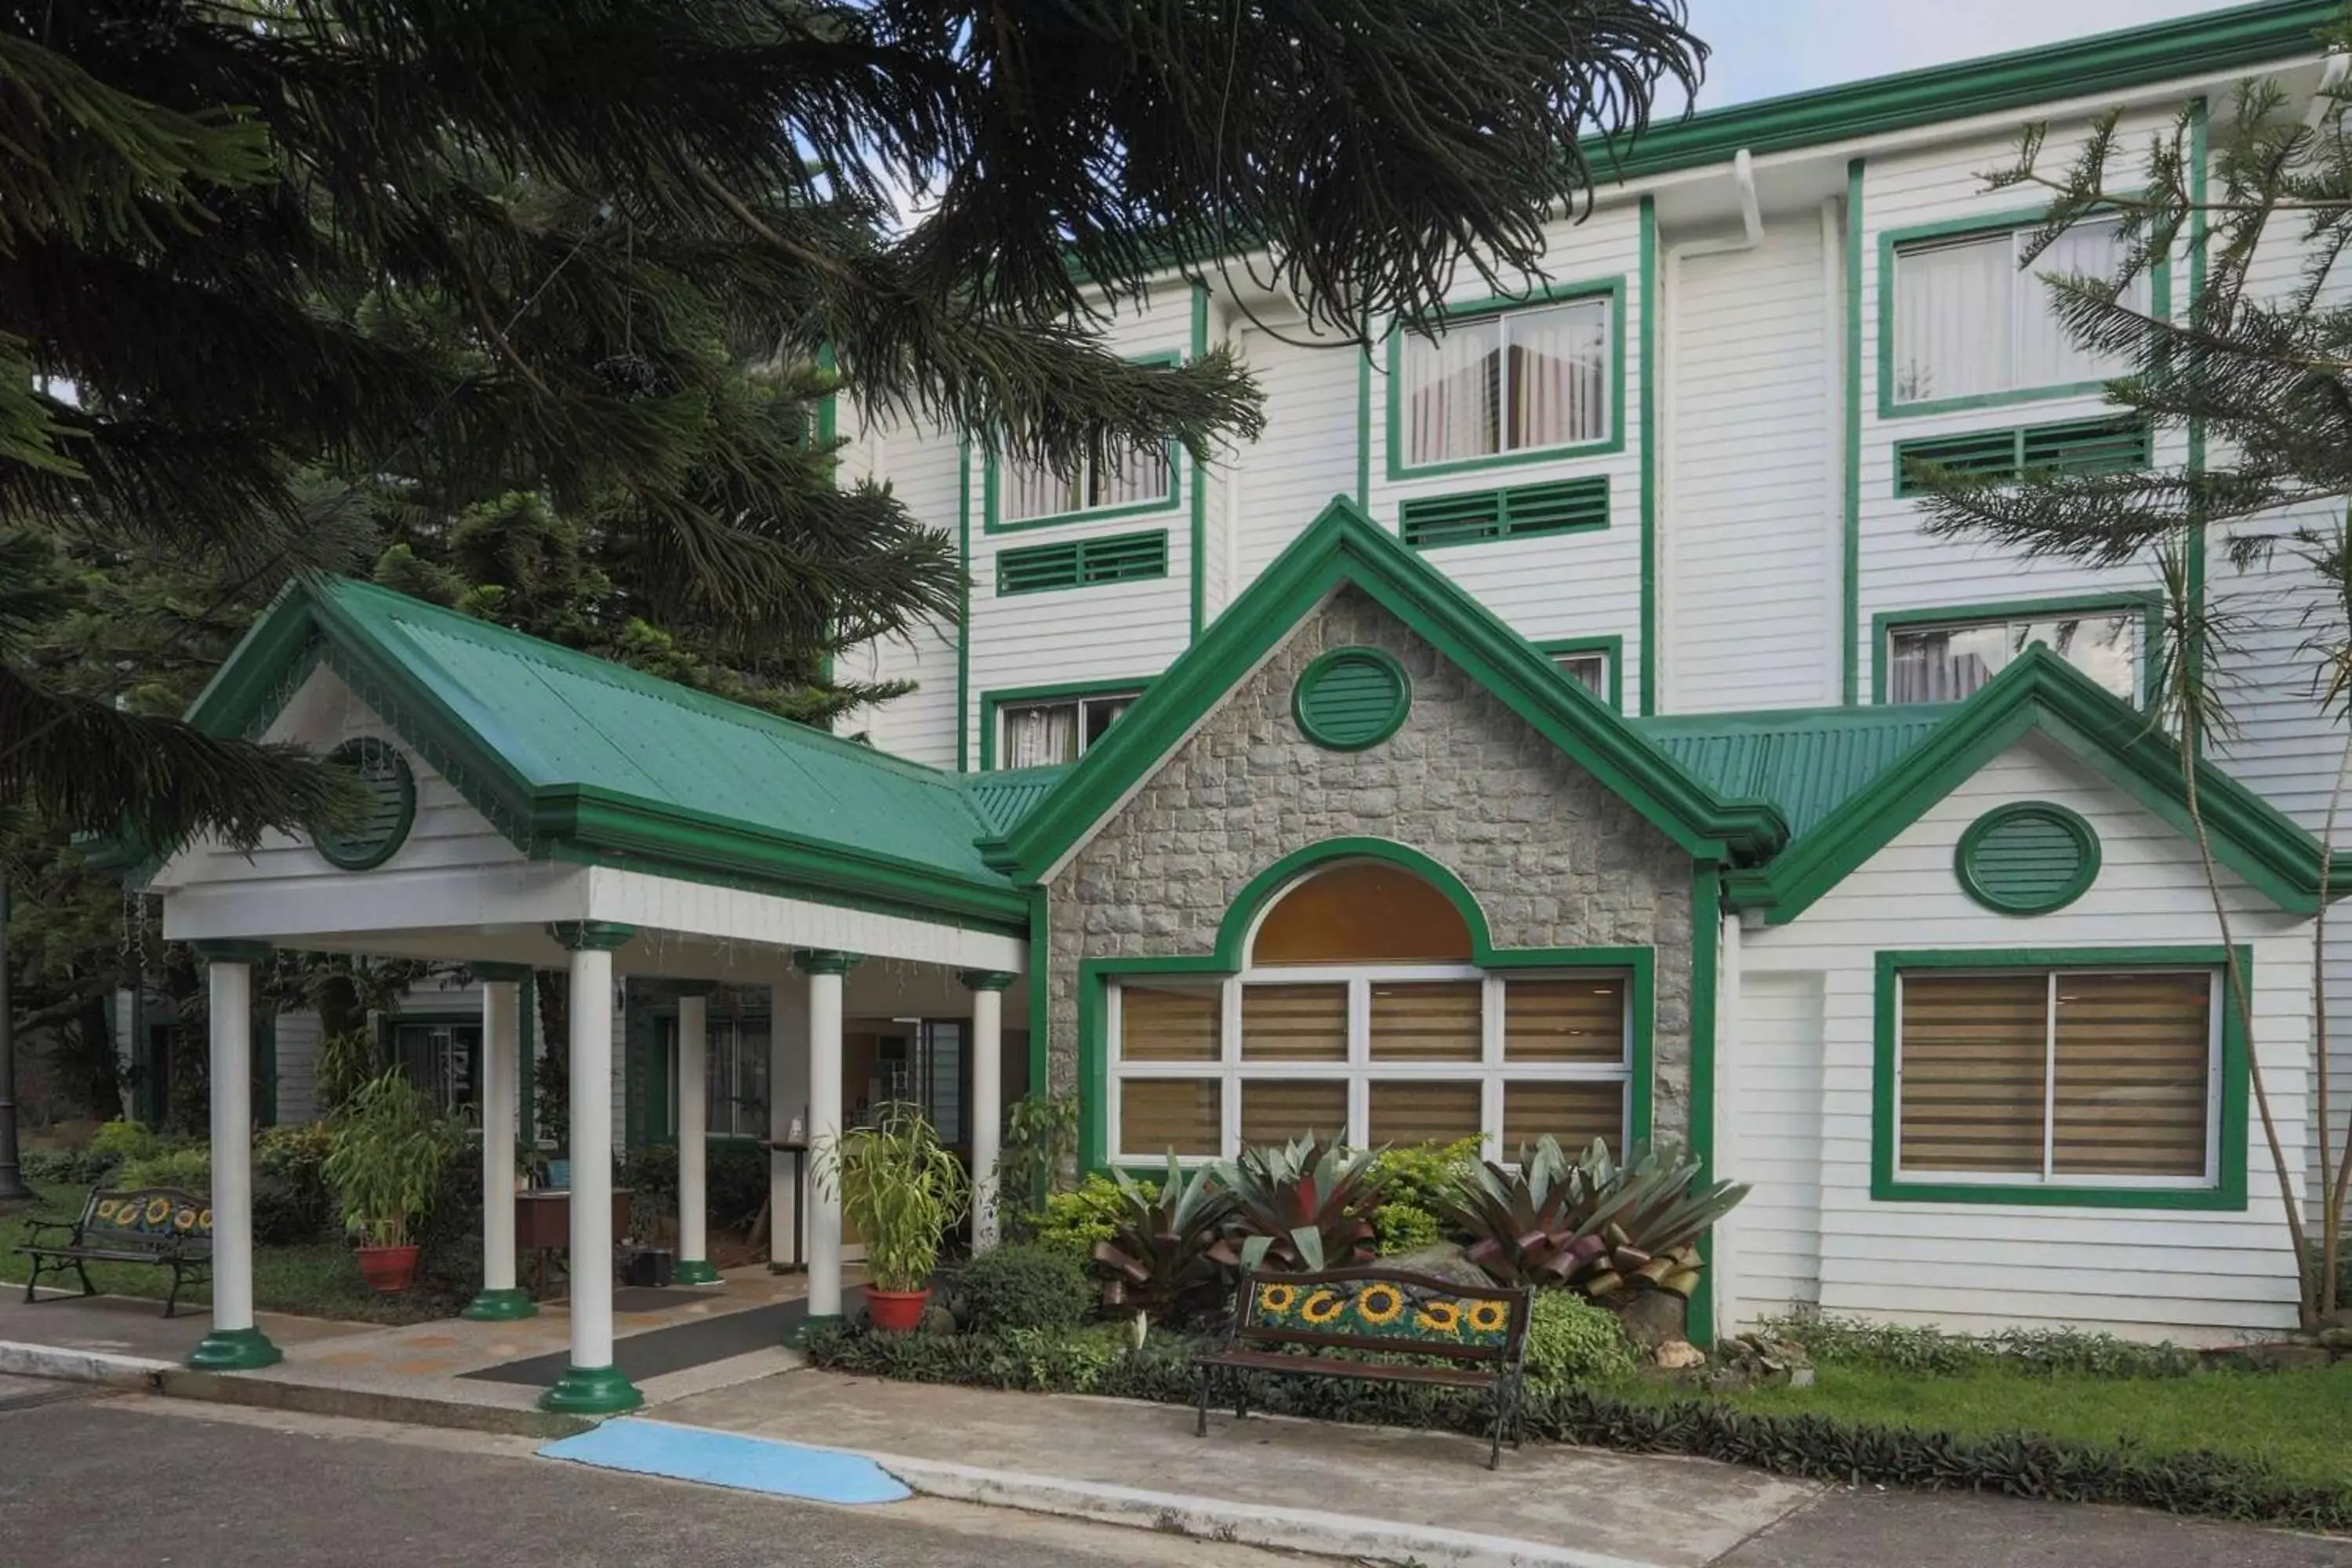 Property Building in Microtel by Wyndham Baguio